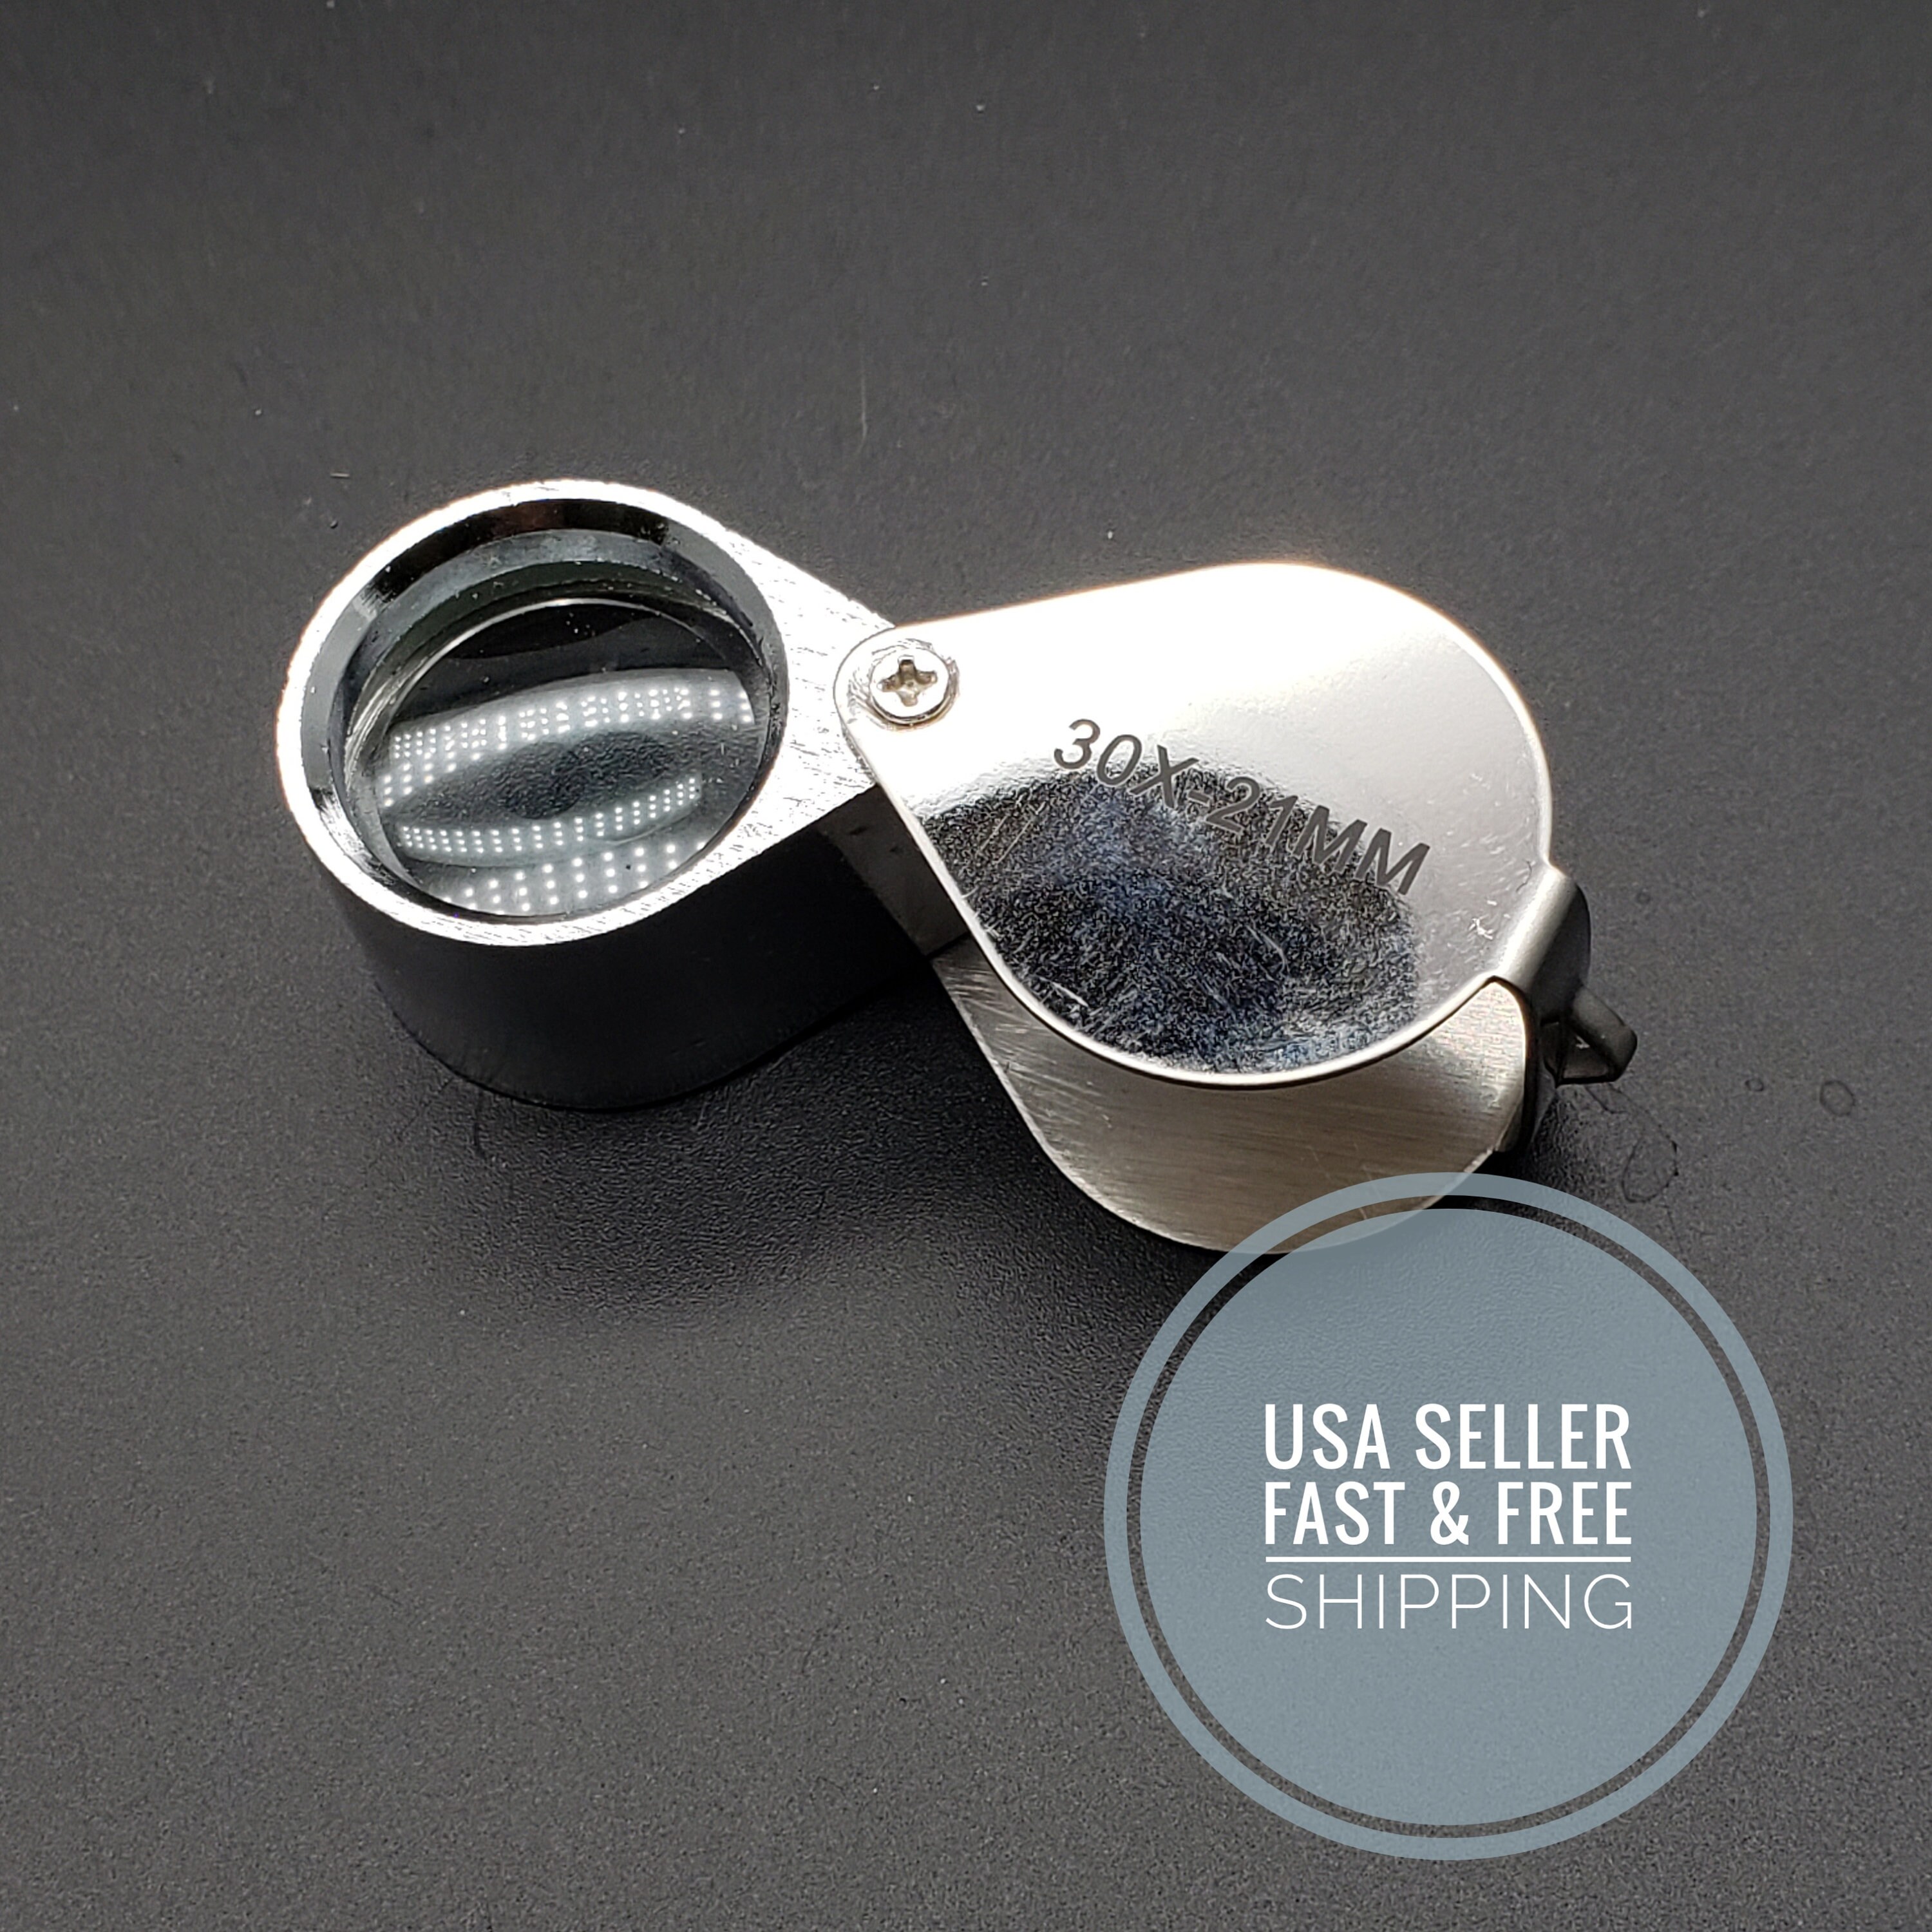 Professional Jewelry Eye Loupe Magnifier For Watches And Antique Compass  Pocket Watch Boxes From Heleniris, $13.89